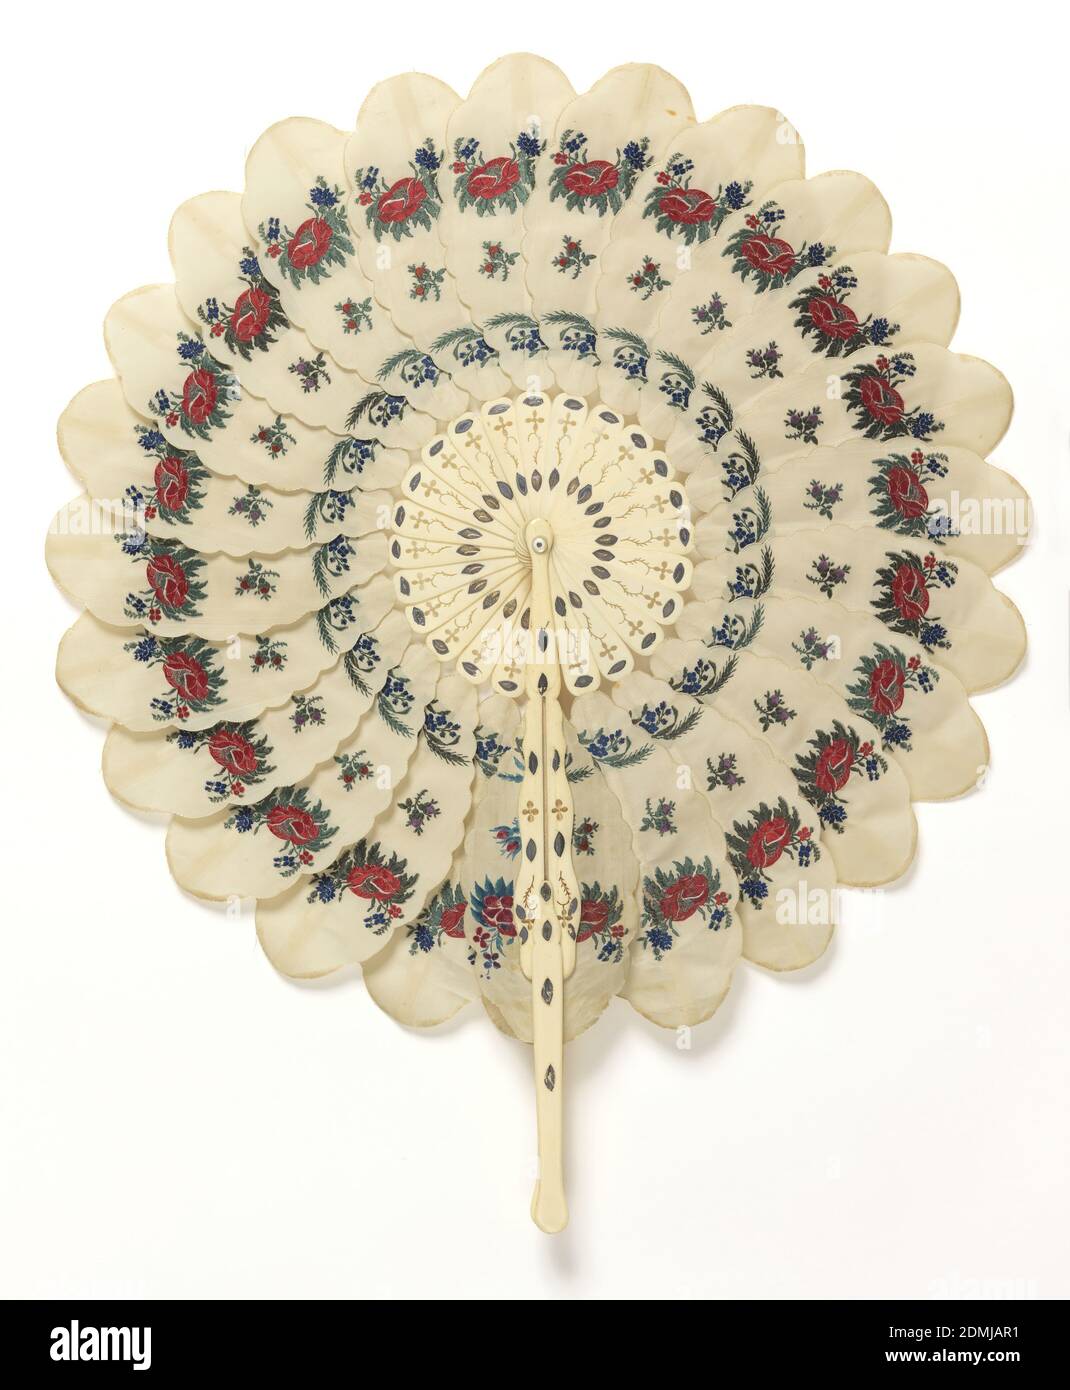 Cockade fan, Brocaded silk leaves, pierced bone handle and sticks, metal rivet with mother-of-pearl washer, Cockade fan with a pierced bone handle and slender sticks supporting twenty-four silk ovals, each with sixteen scallops, all edges rolled and whipped. Each leaf is decorated at three points with brocaded colored silk flowers, and attached to the guards by a slender stick on back. The two end ovals adhere to guards that have portions sliding in groove, forming handle. Inner ends of sticks pivot on a metal rivet with mother-of-[earl washer., possibly USA, possibly France, ca. 1850, costume Stock Photo